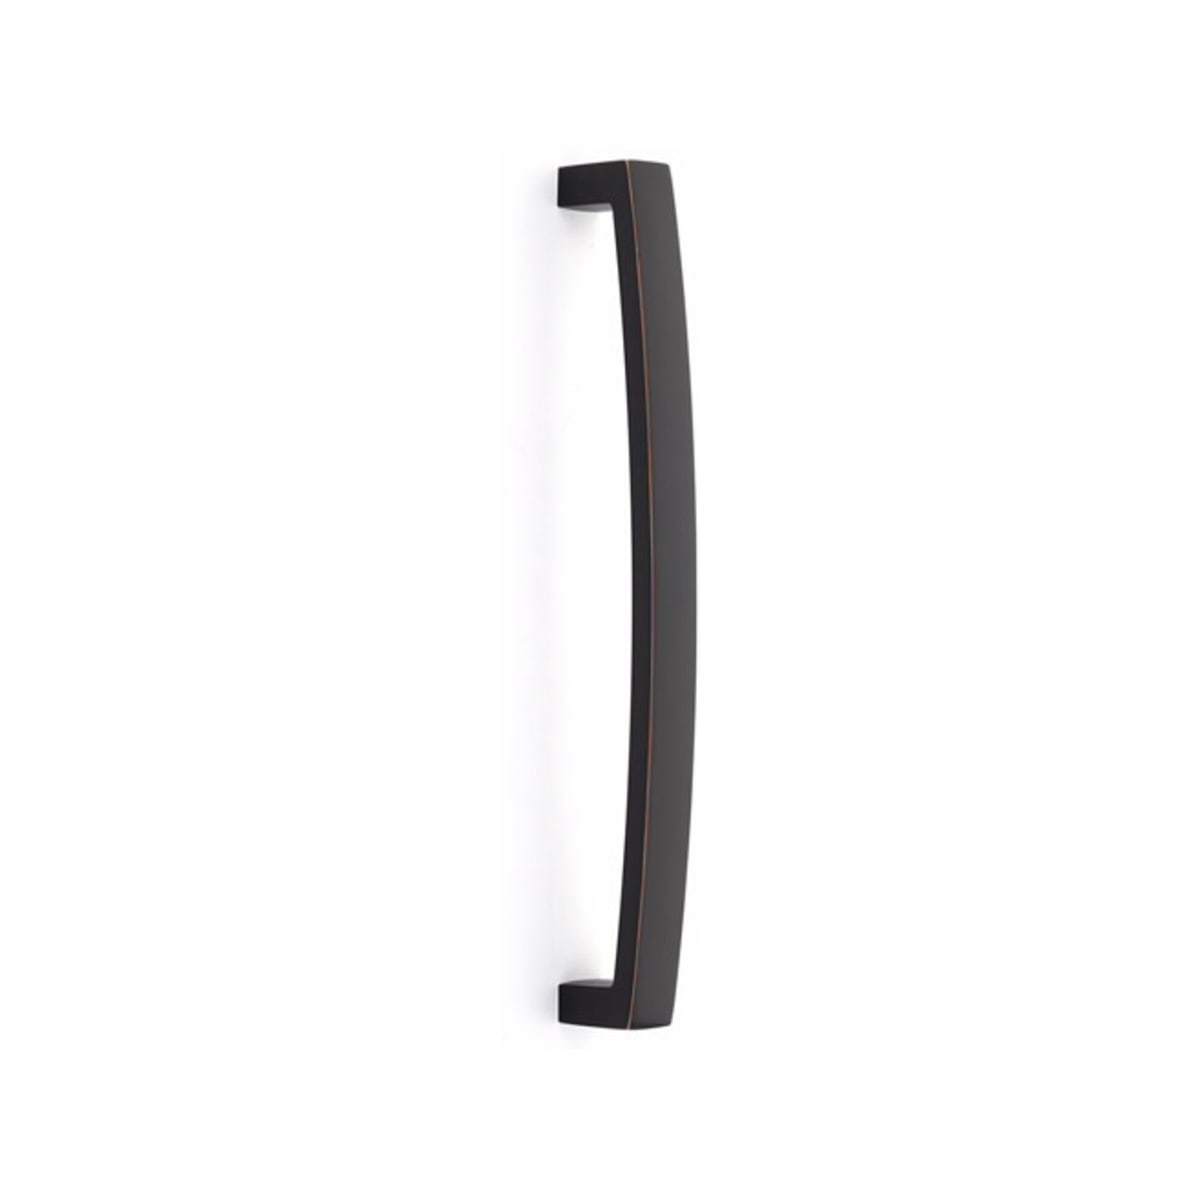 CS86345US10B - Concealed Surface Mount - Brass Bauhaus Appliance Pull - 12" - Oil Rubbed Bronze